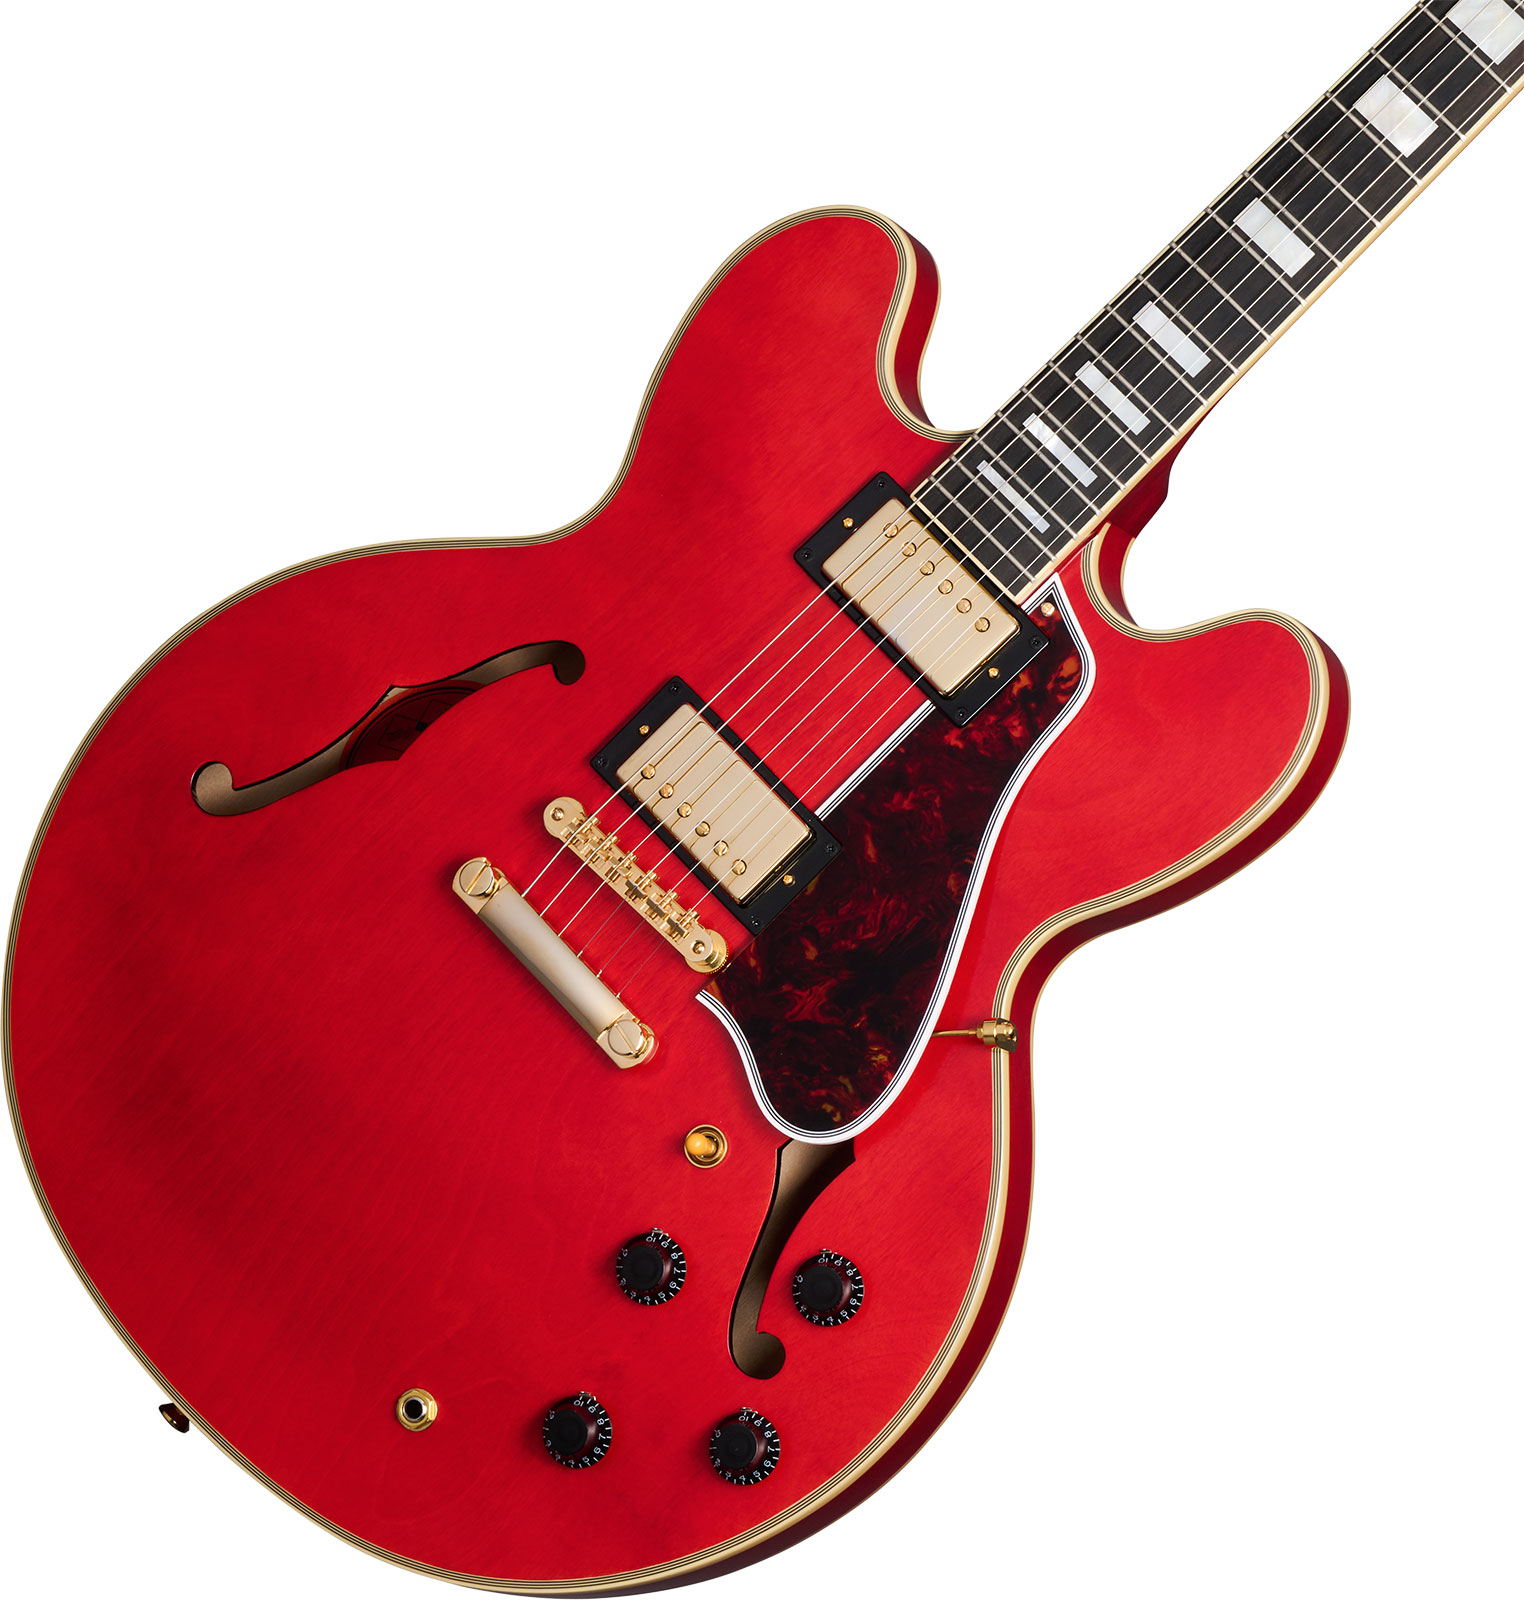 Epiphone Es355 1959 Inspired By 2h Gibson Ht Eb - Vos Cherry Red - Guitare Électrique 1/2 Caisse - Variation 3